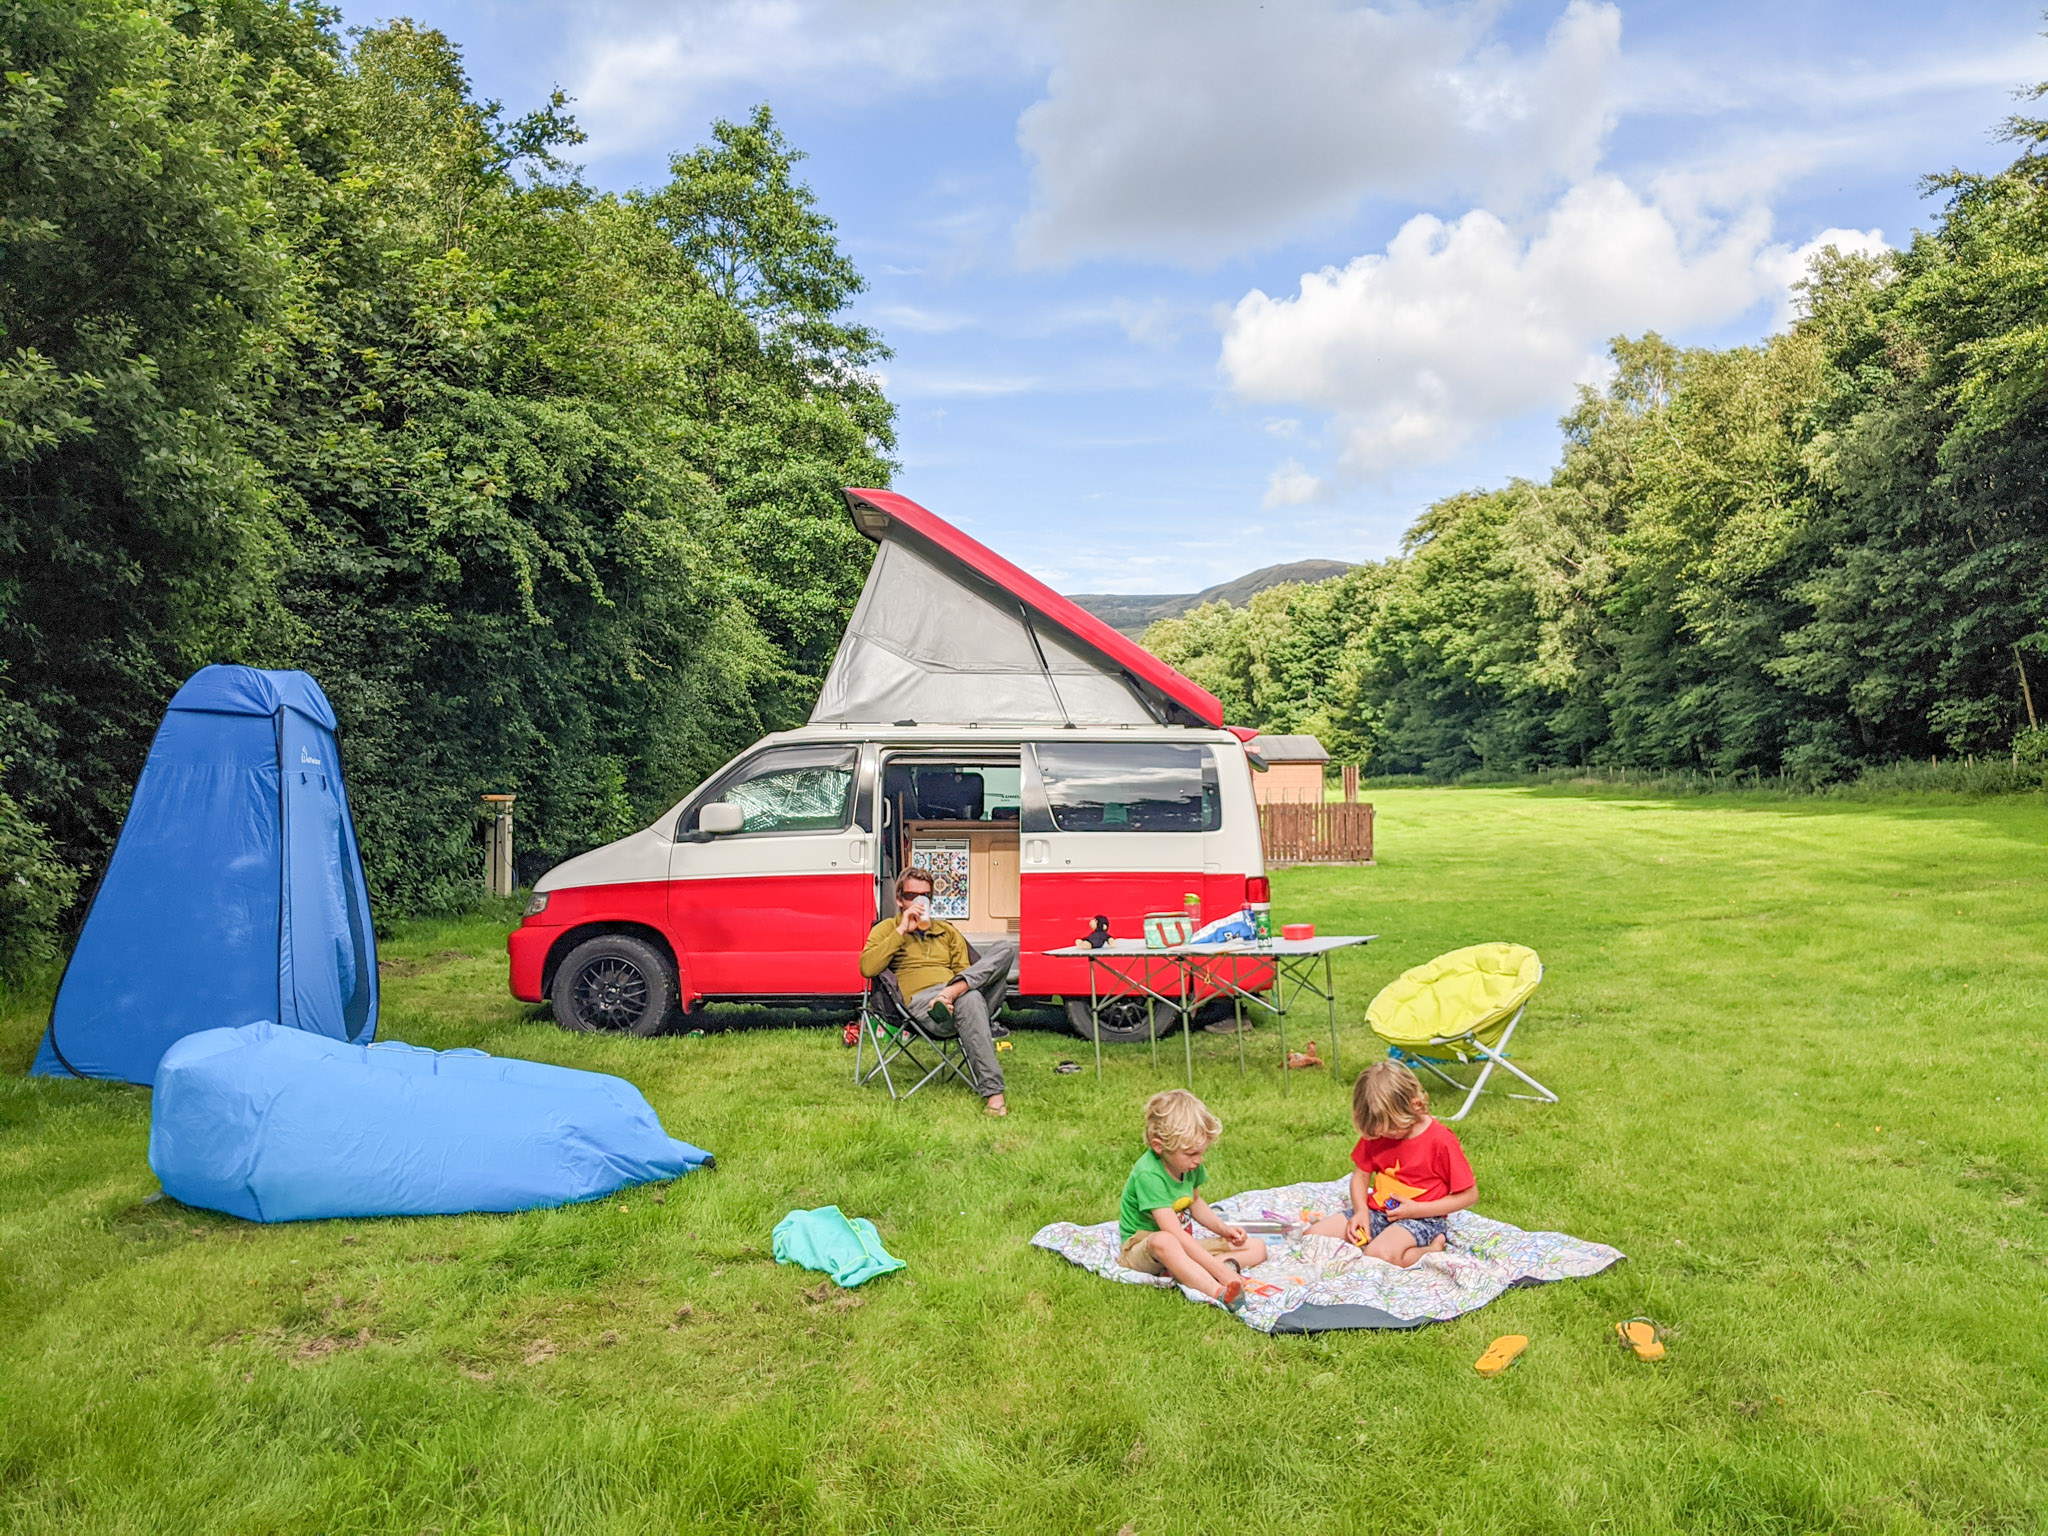 Our Bongo packing checklist for family camping